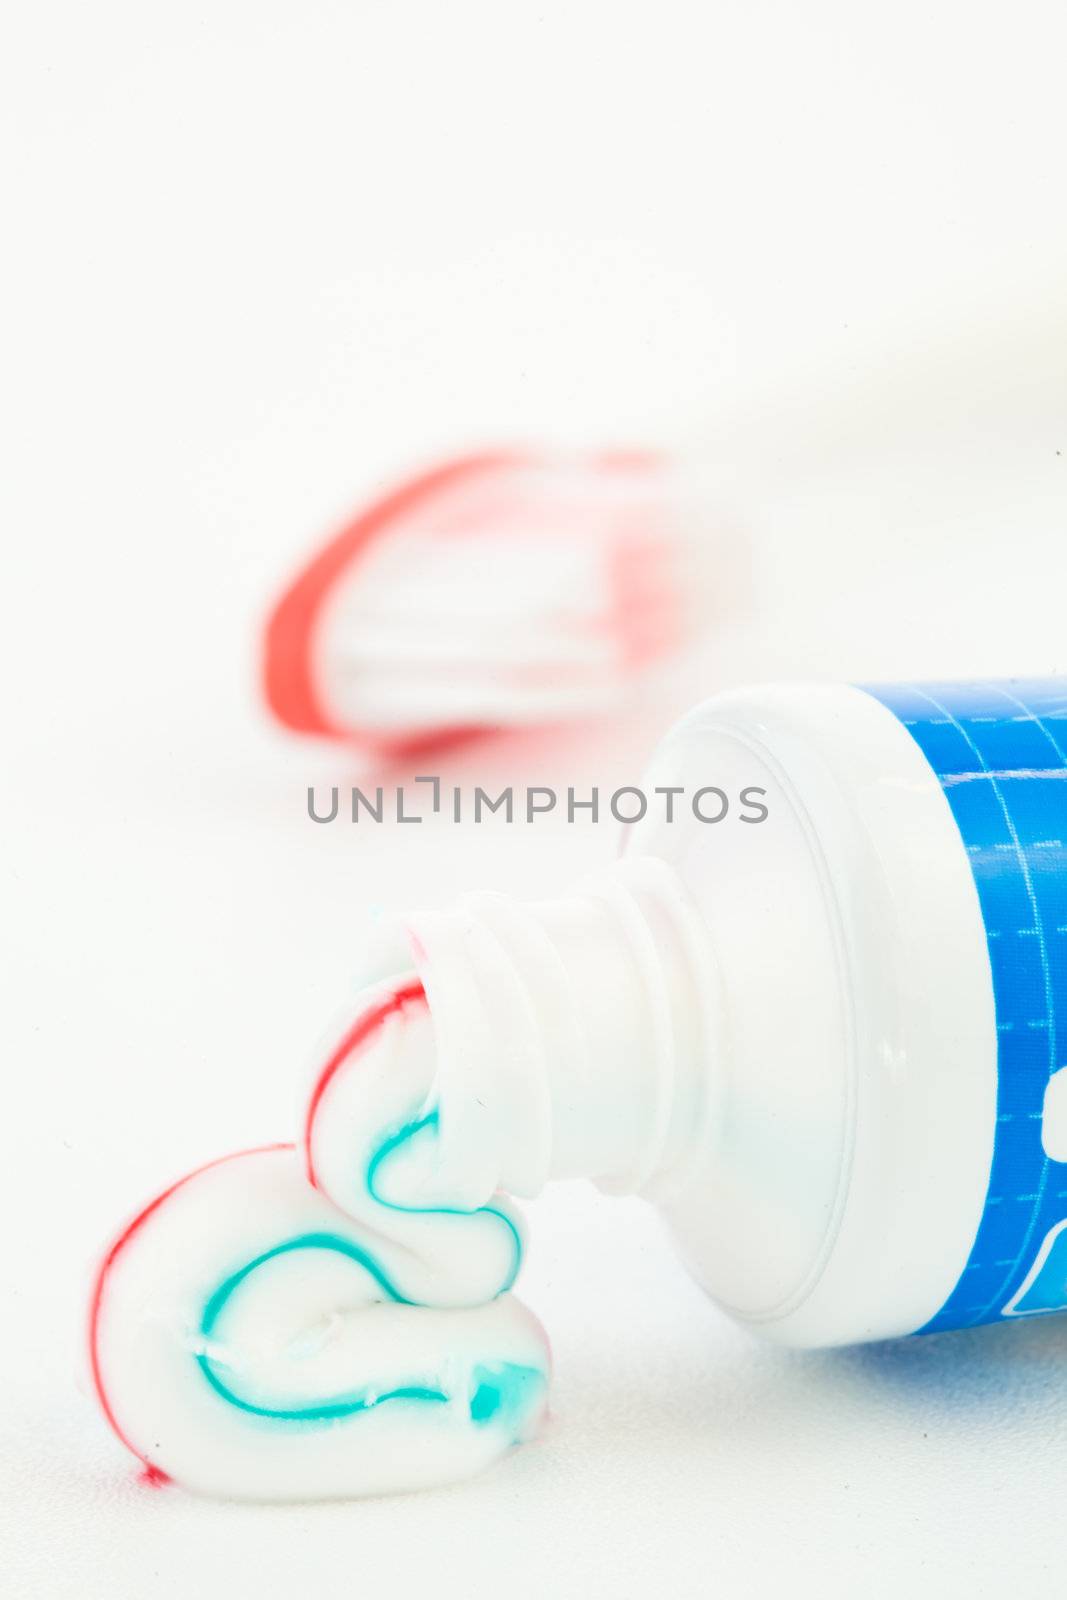 Blue tube of toothpaste next to a toothbrush against white background